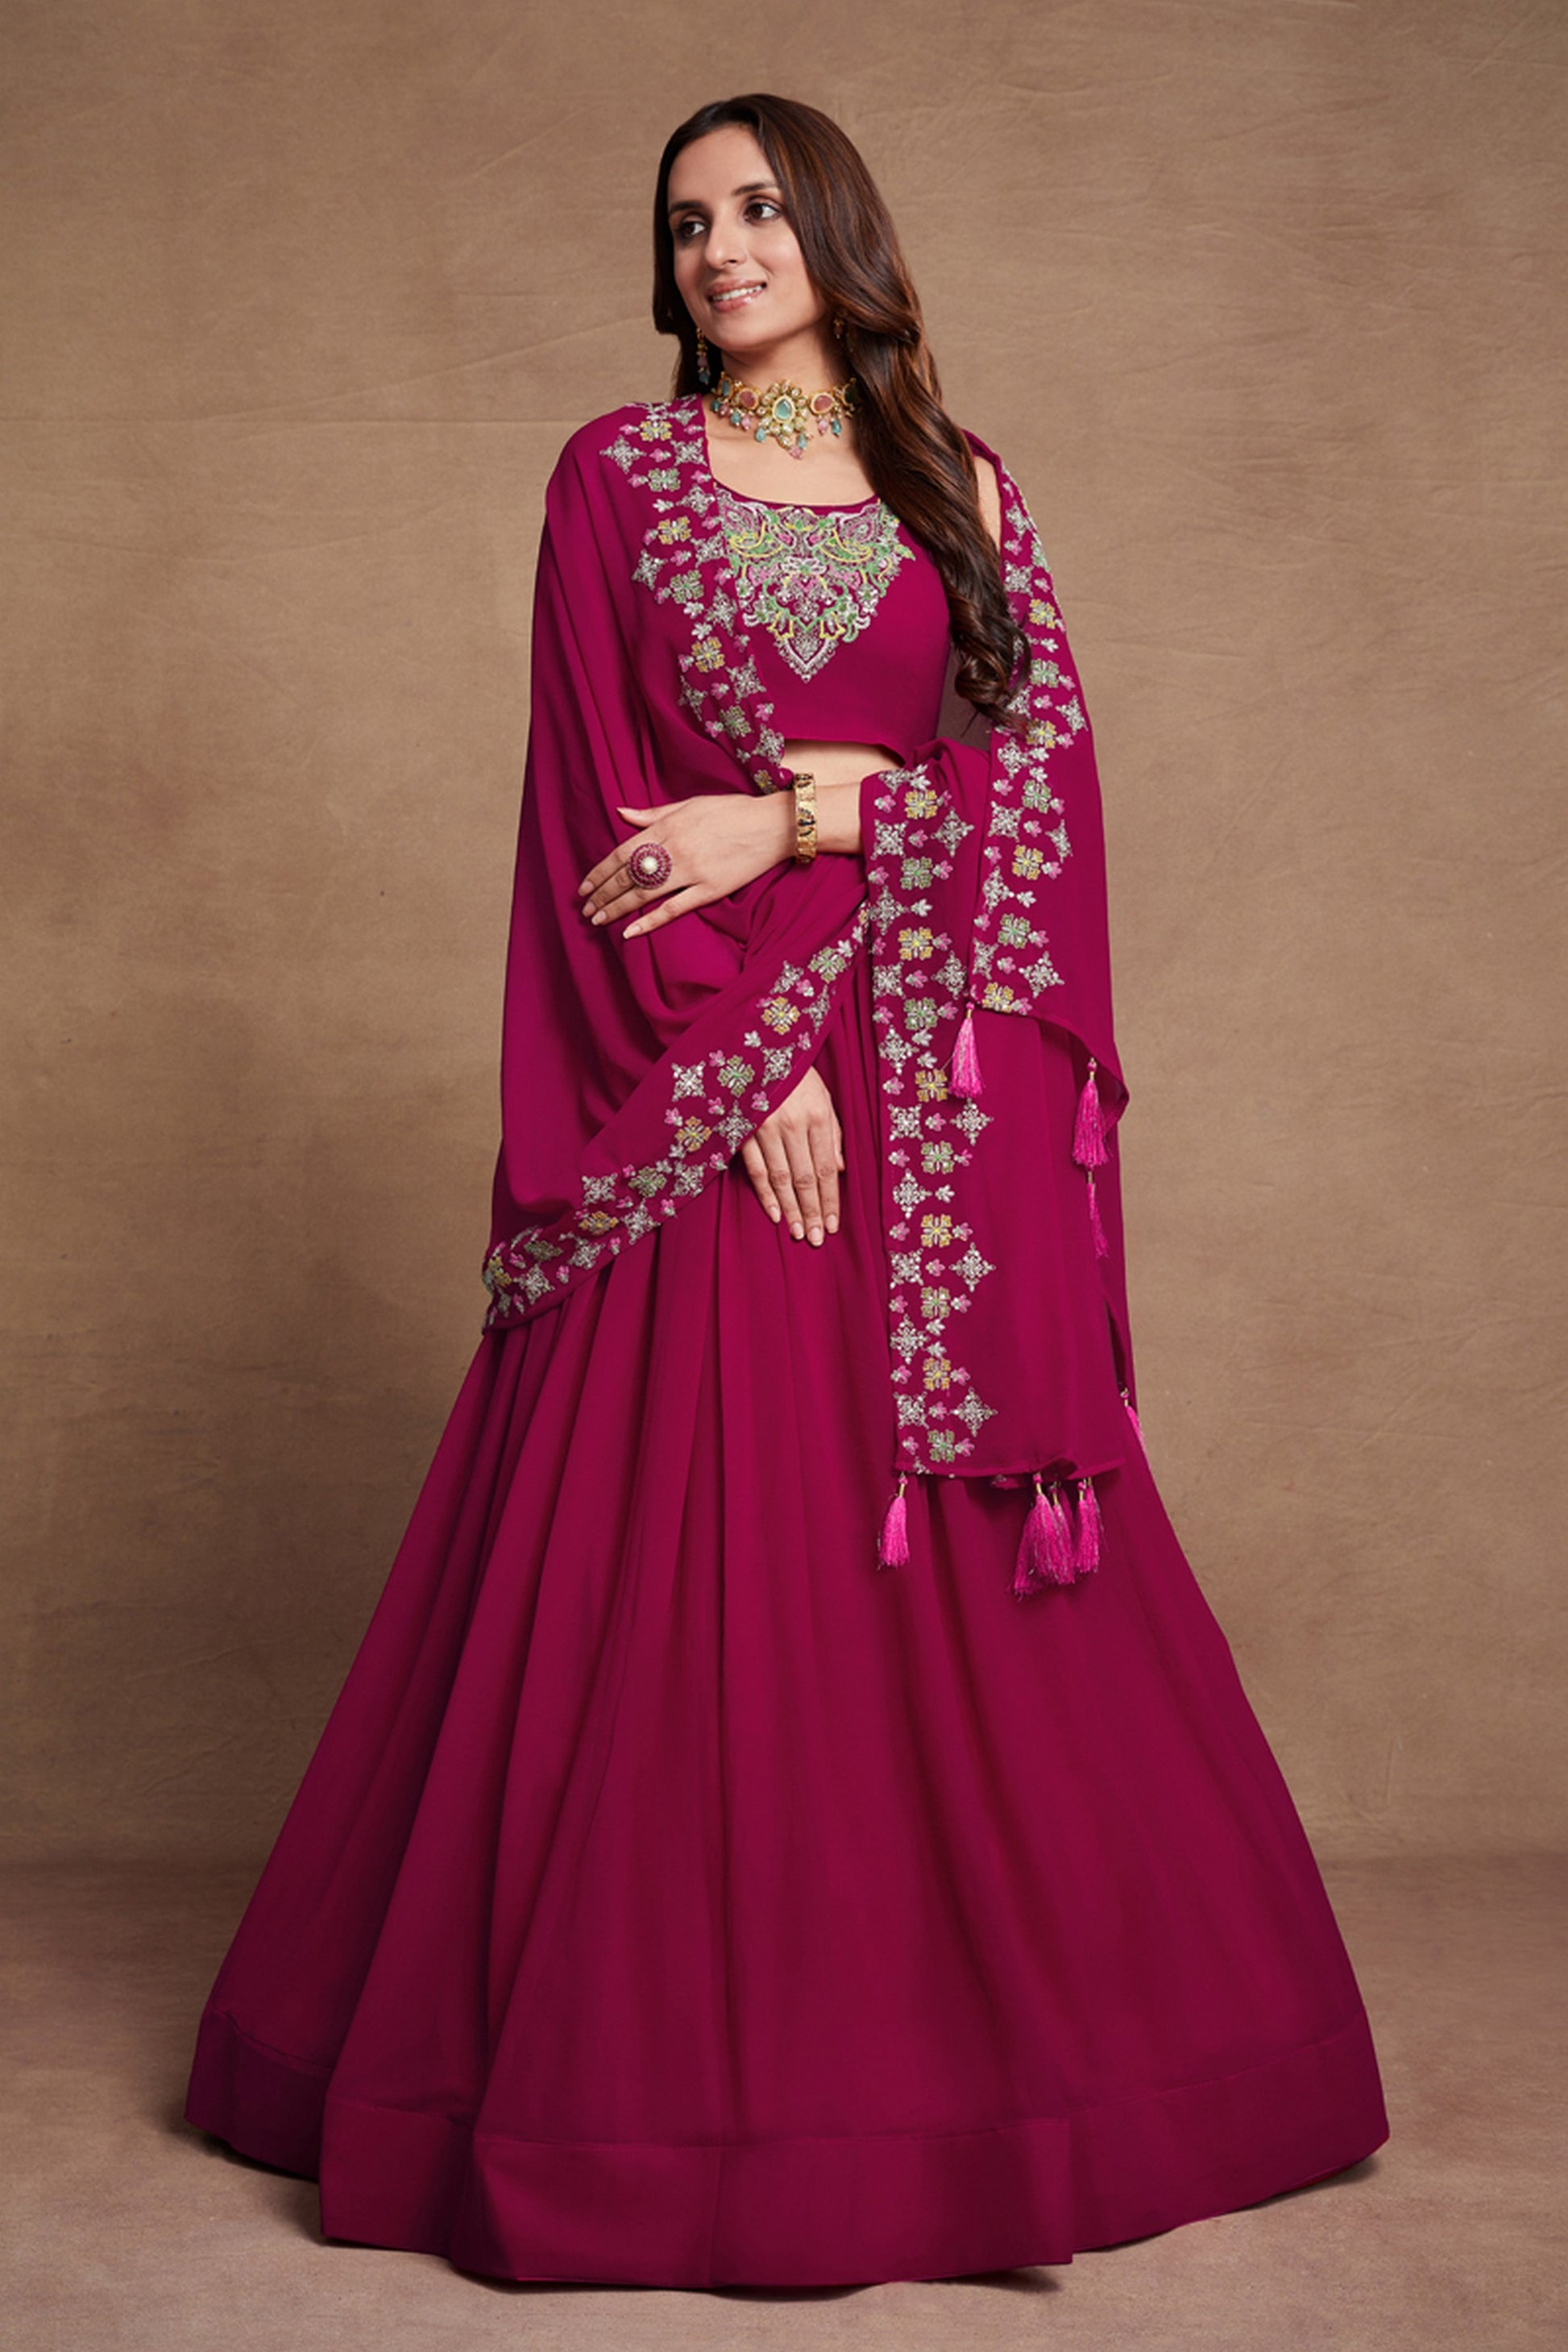 Pink Georgette Lehenga Choli 6 Meter Flair For Indian Festivals & Weddings - Sequence Embroidery Work, Thread Embroidery Work